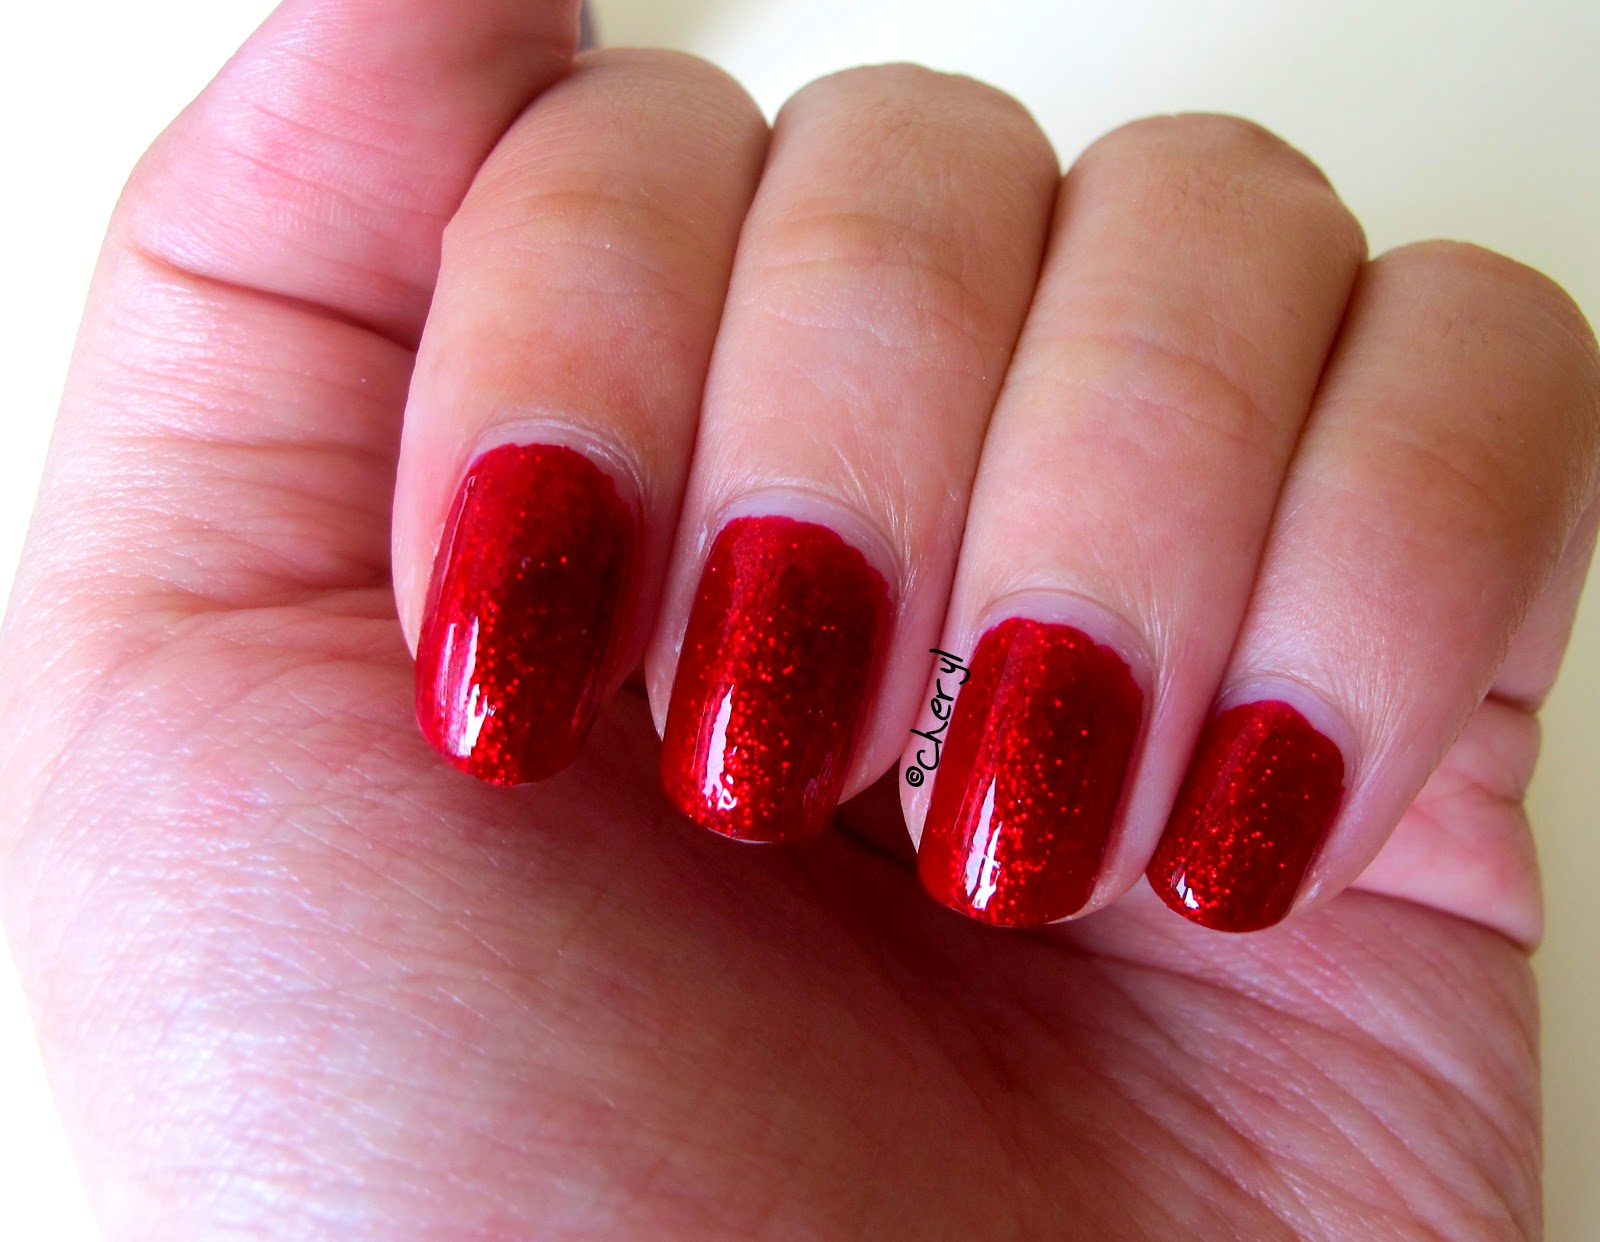 5. China Glaze Nail Lacquer in "Ruby Pumps" - wide 8